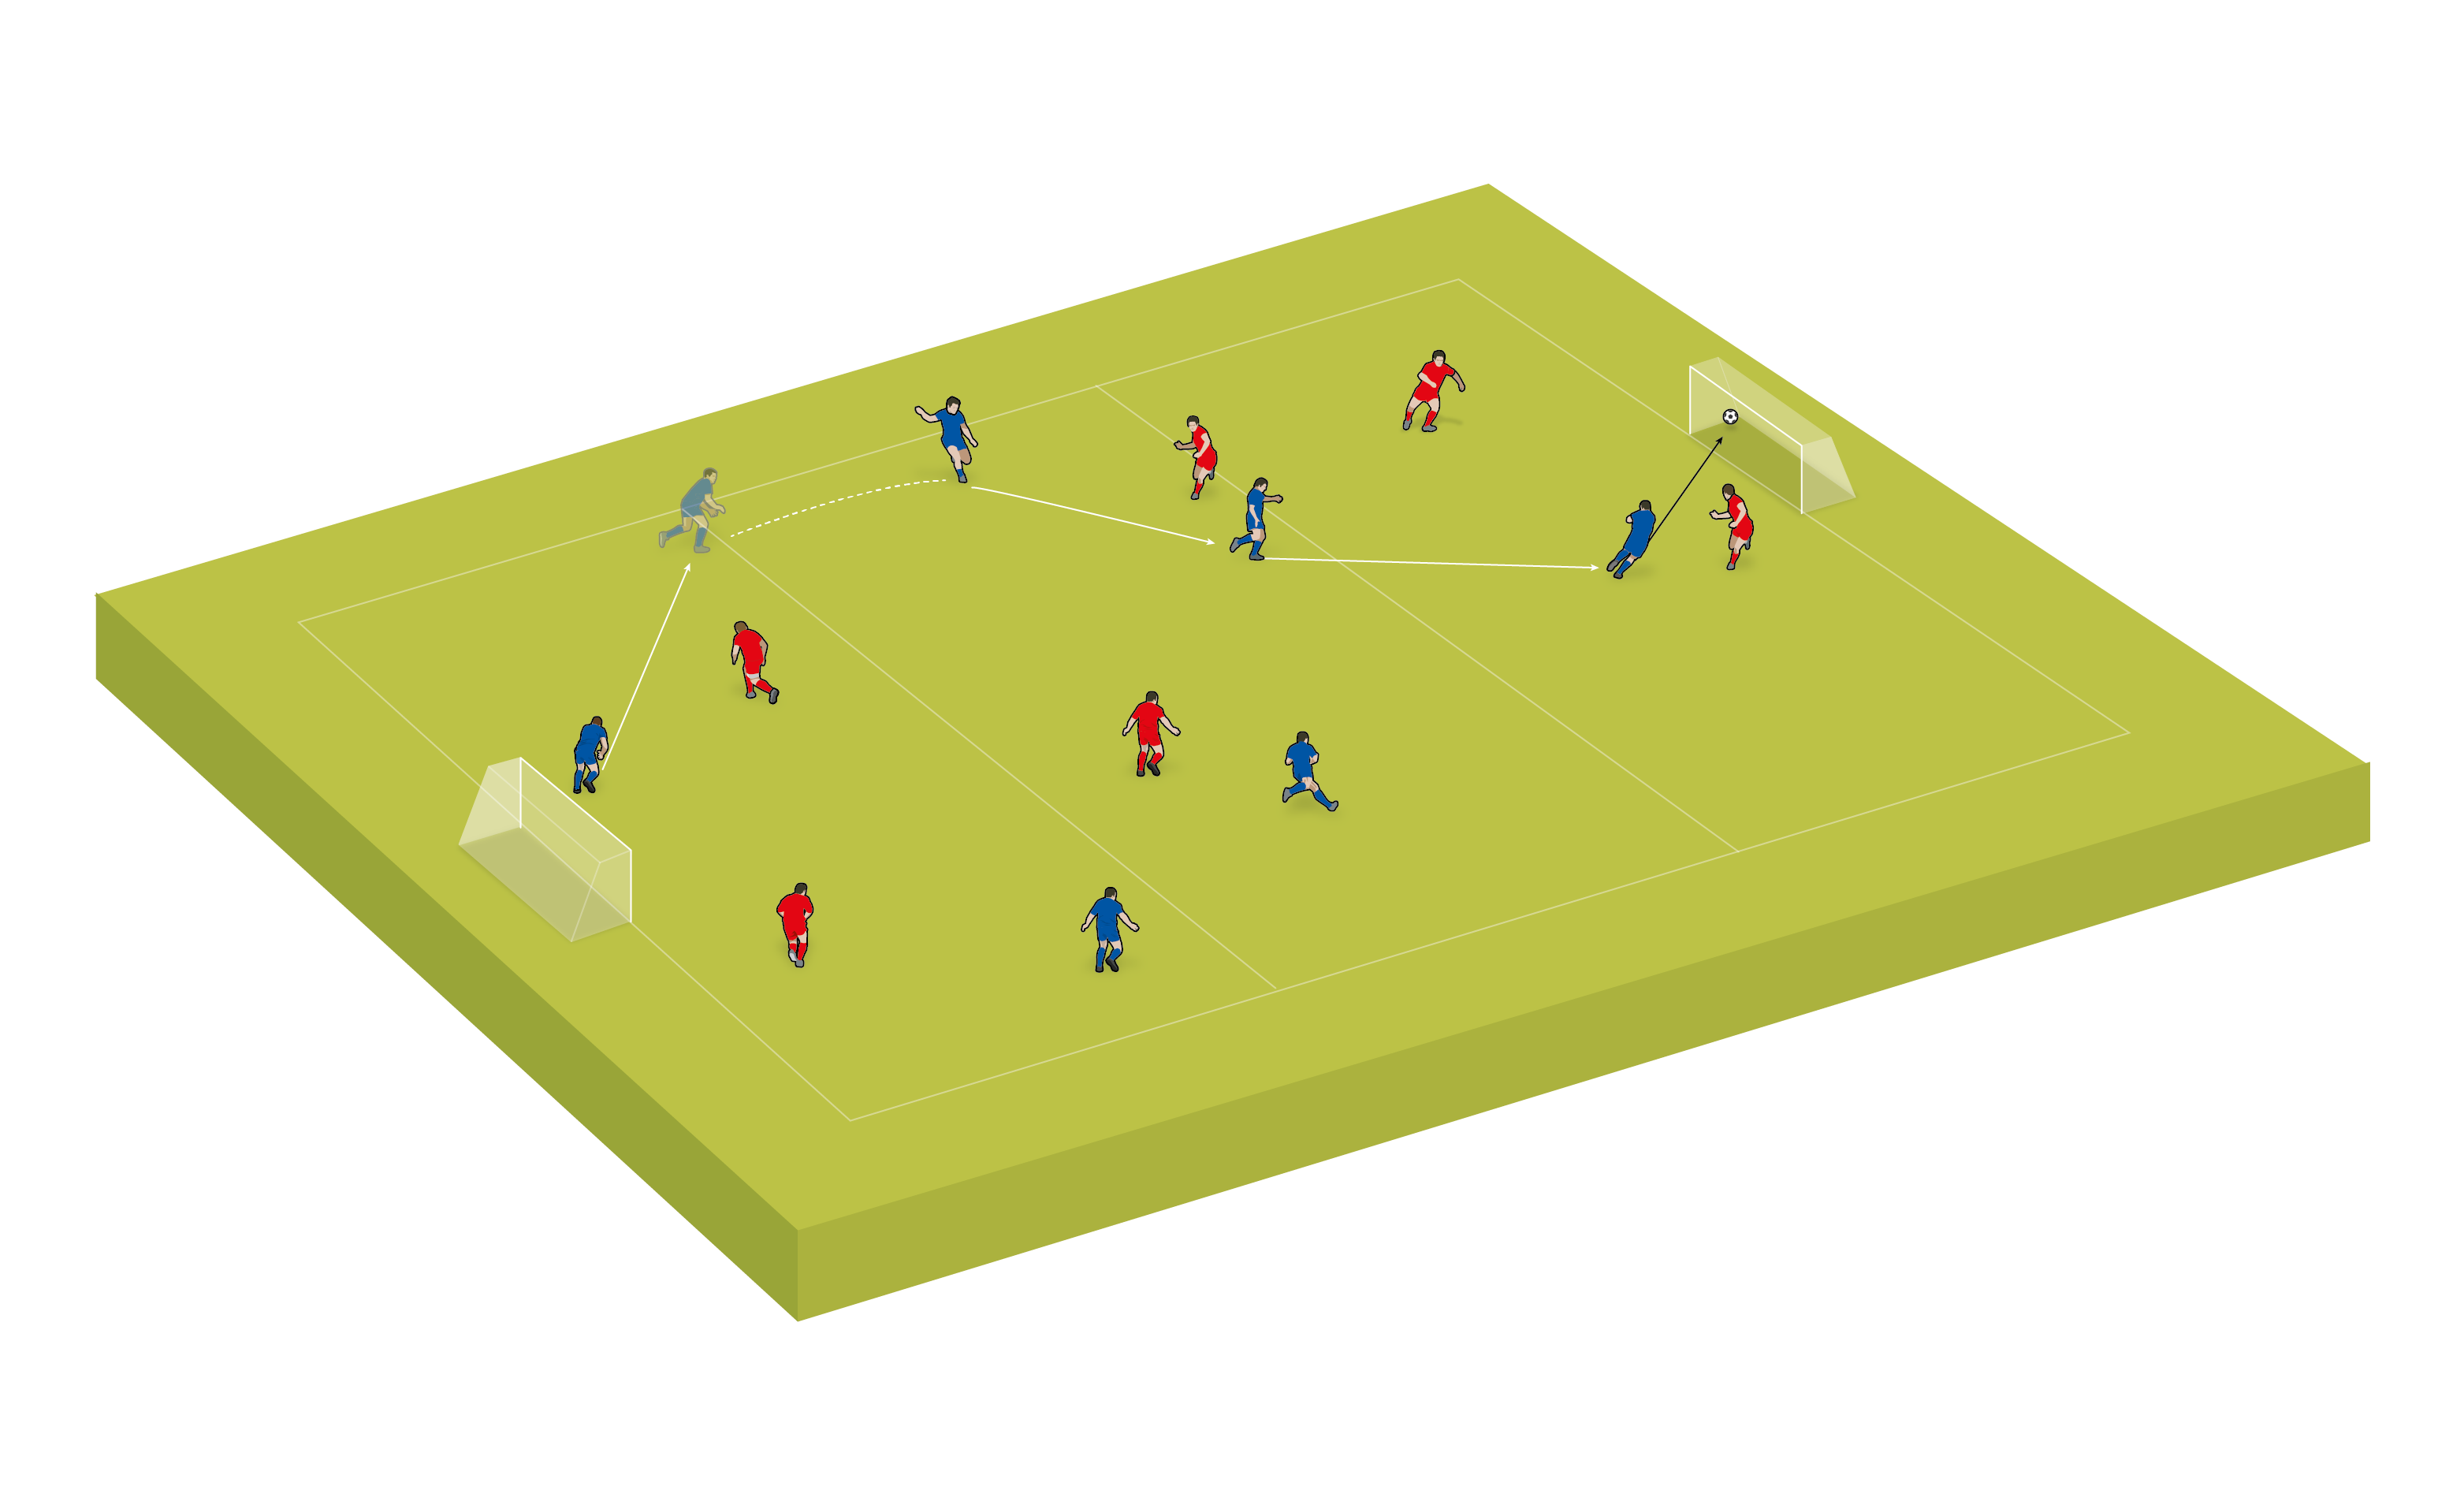 Small-sided game: Play out from defence